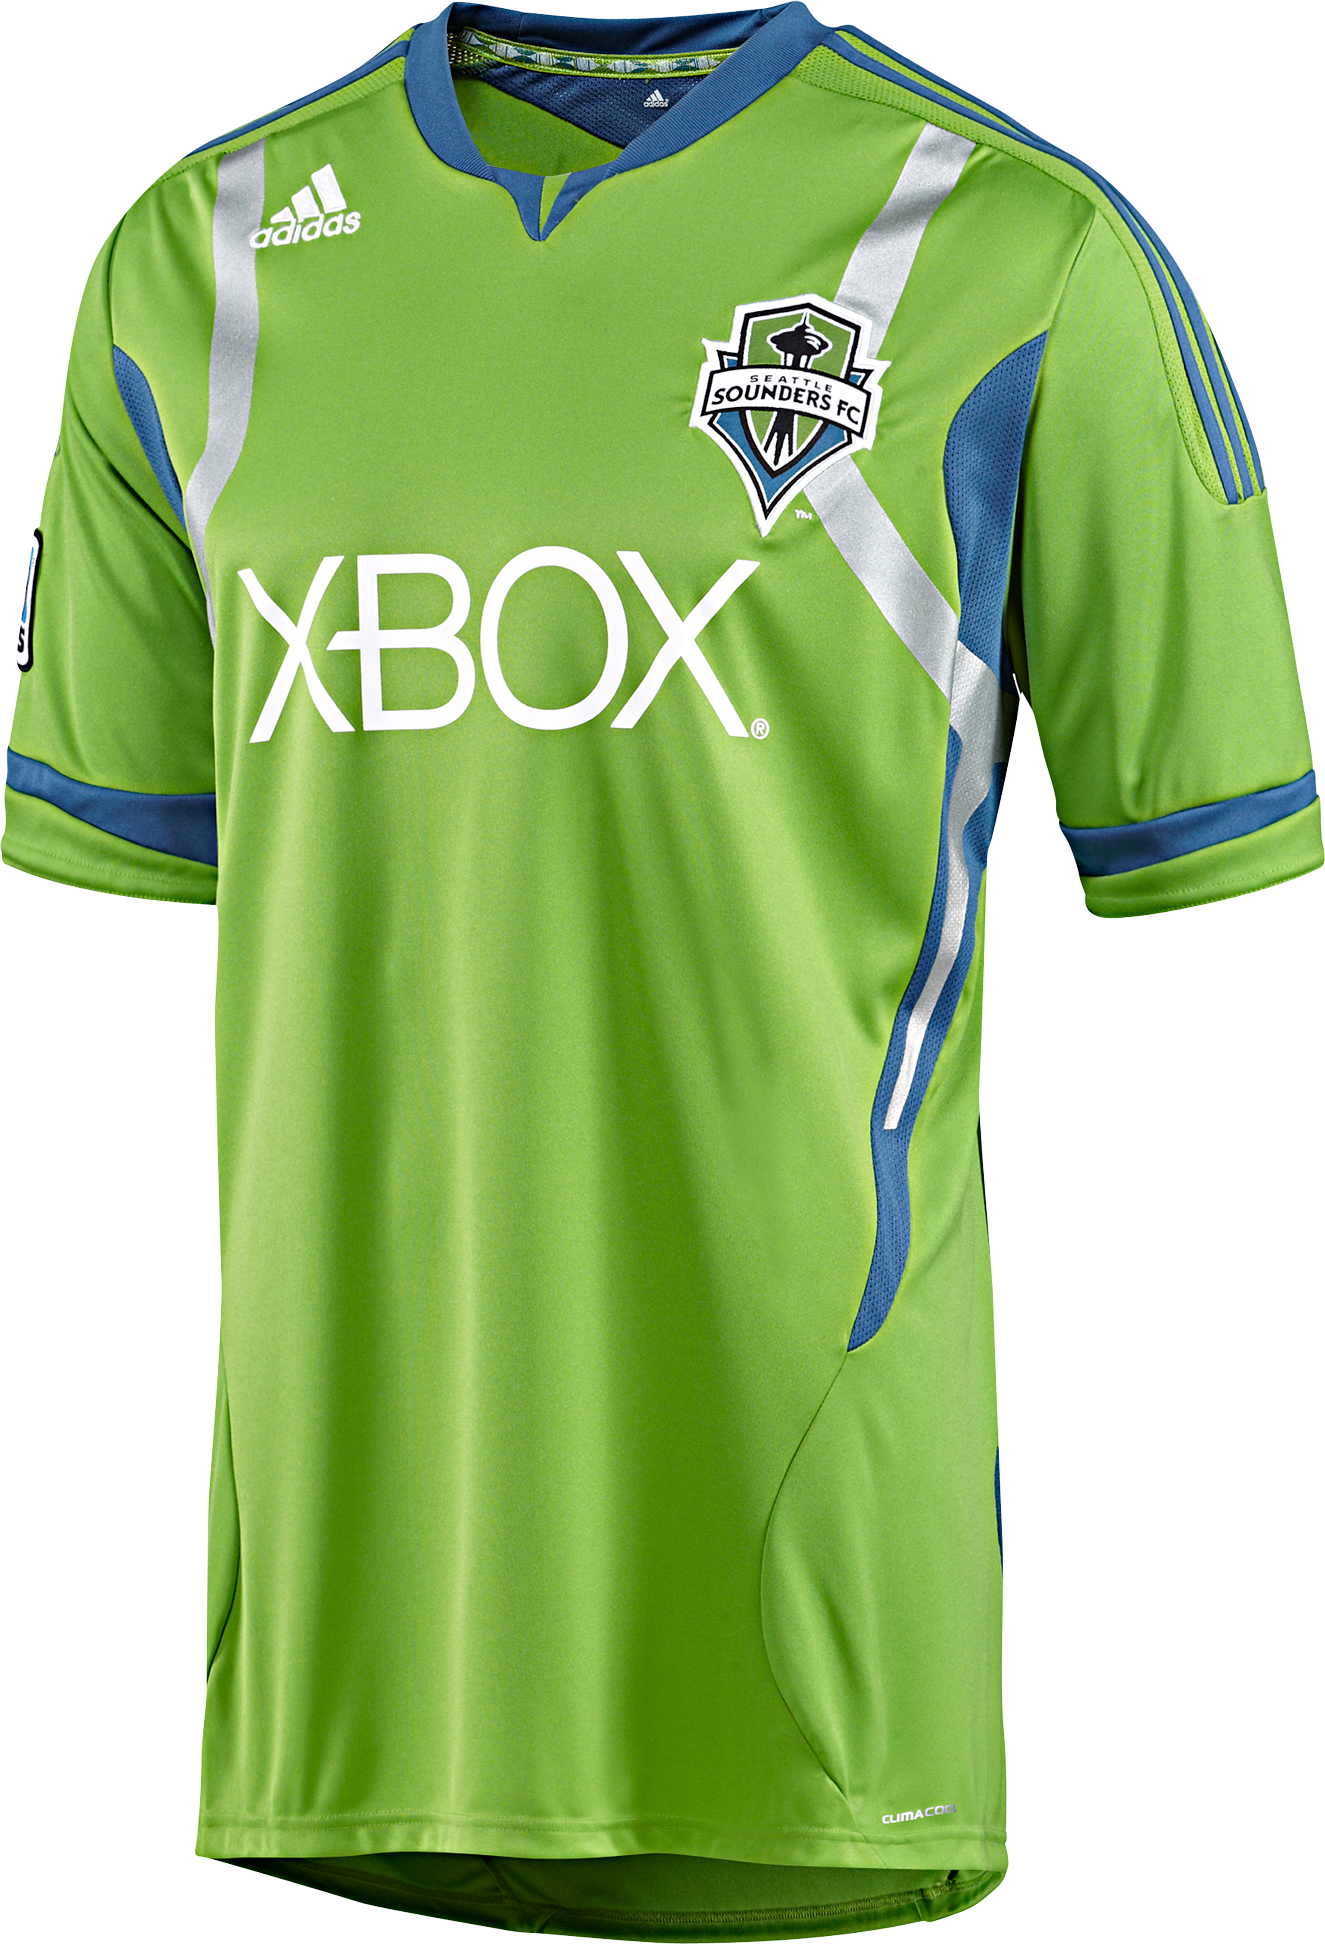 Seattle Sounders 2011 Jersey Review